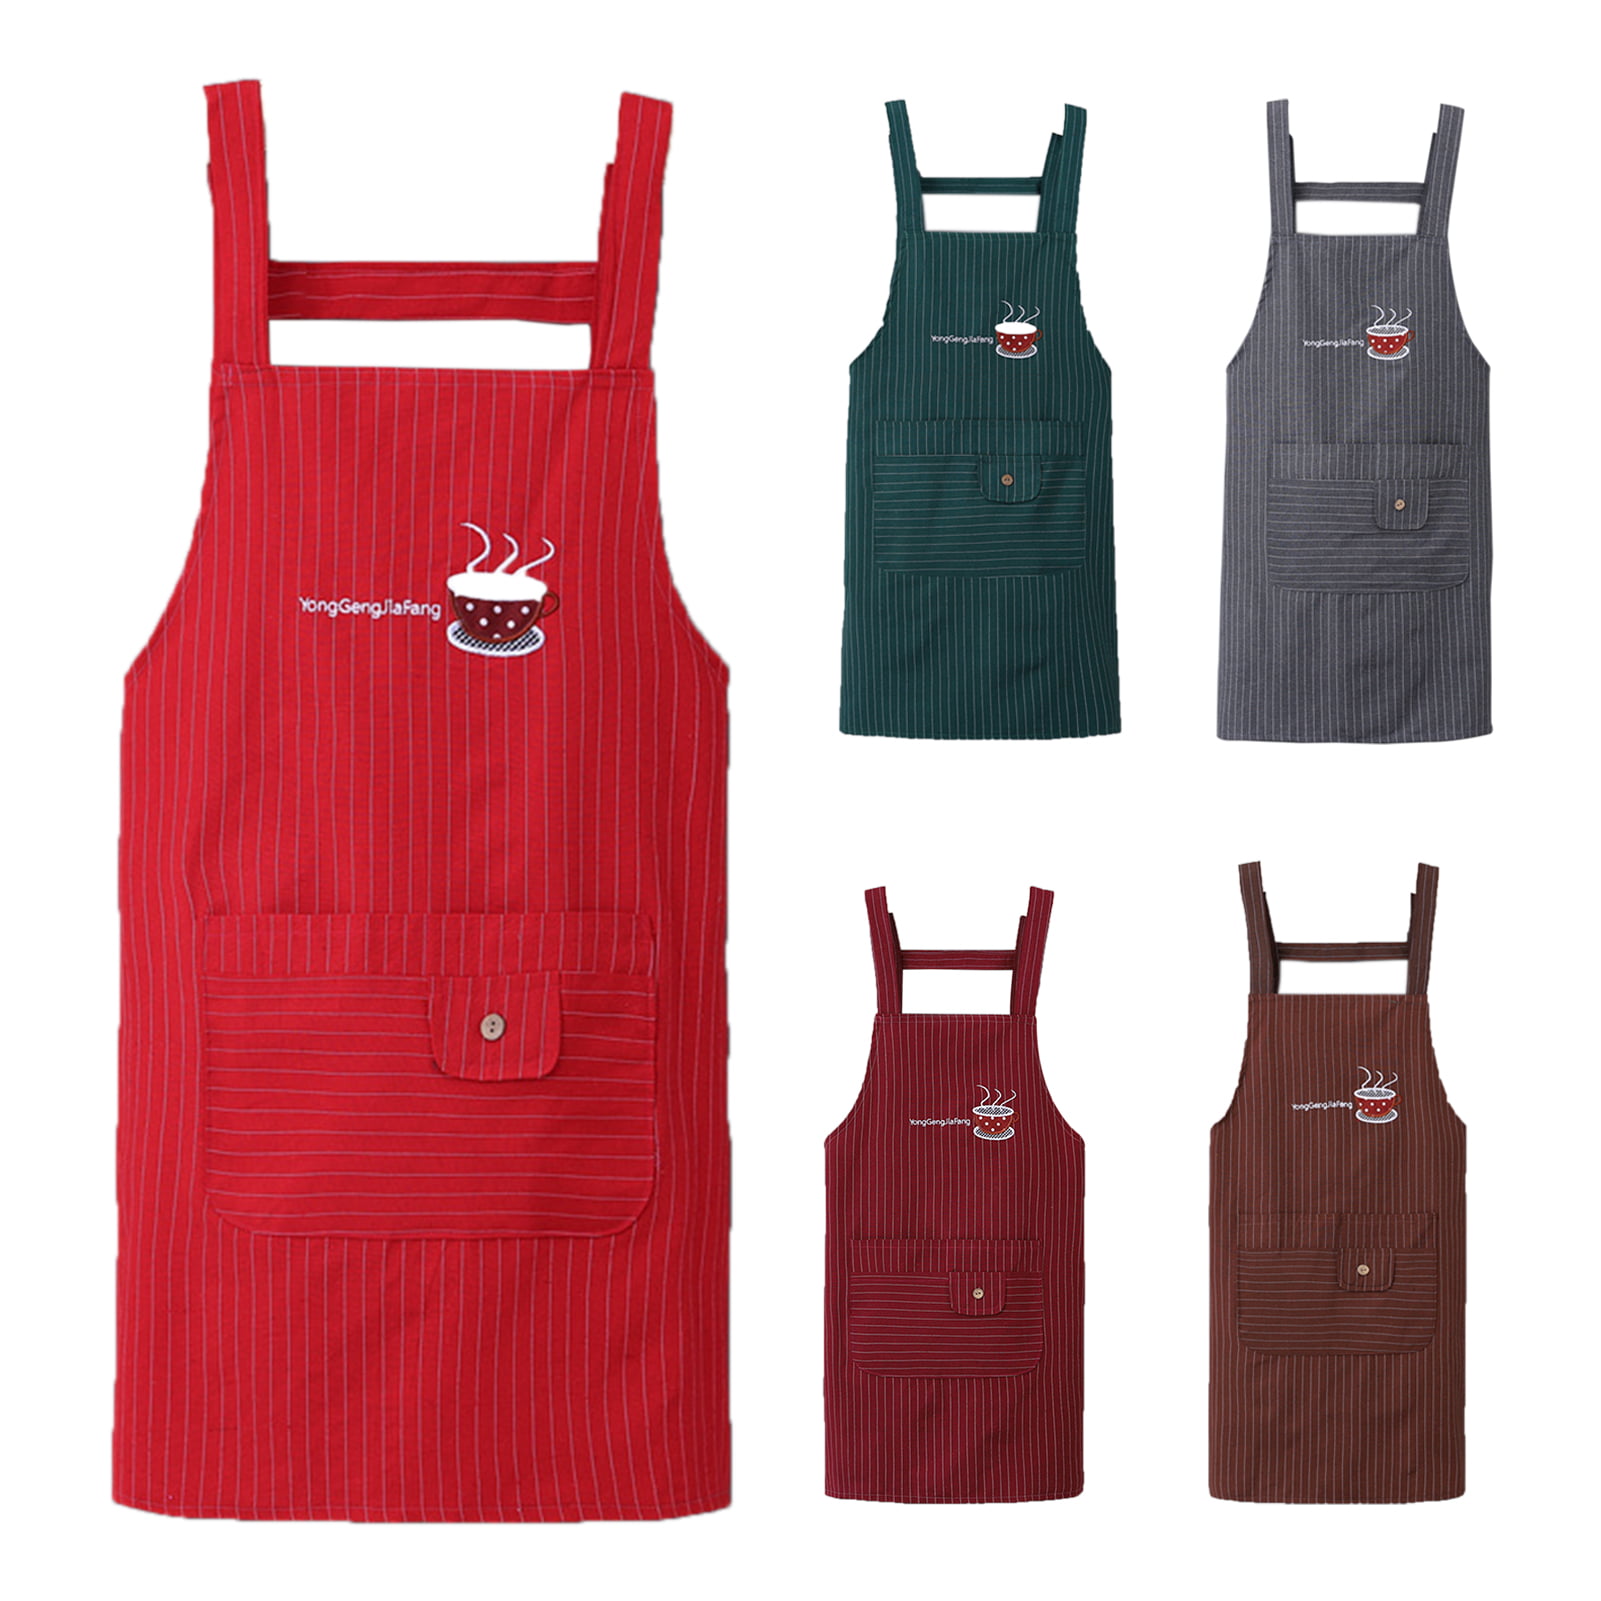 APRON Bib Style Kitchen or BBQ with pocket Grillin' & Chillin'